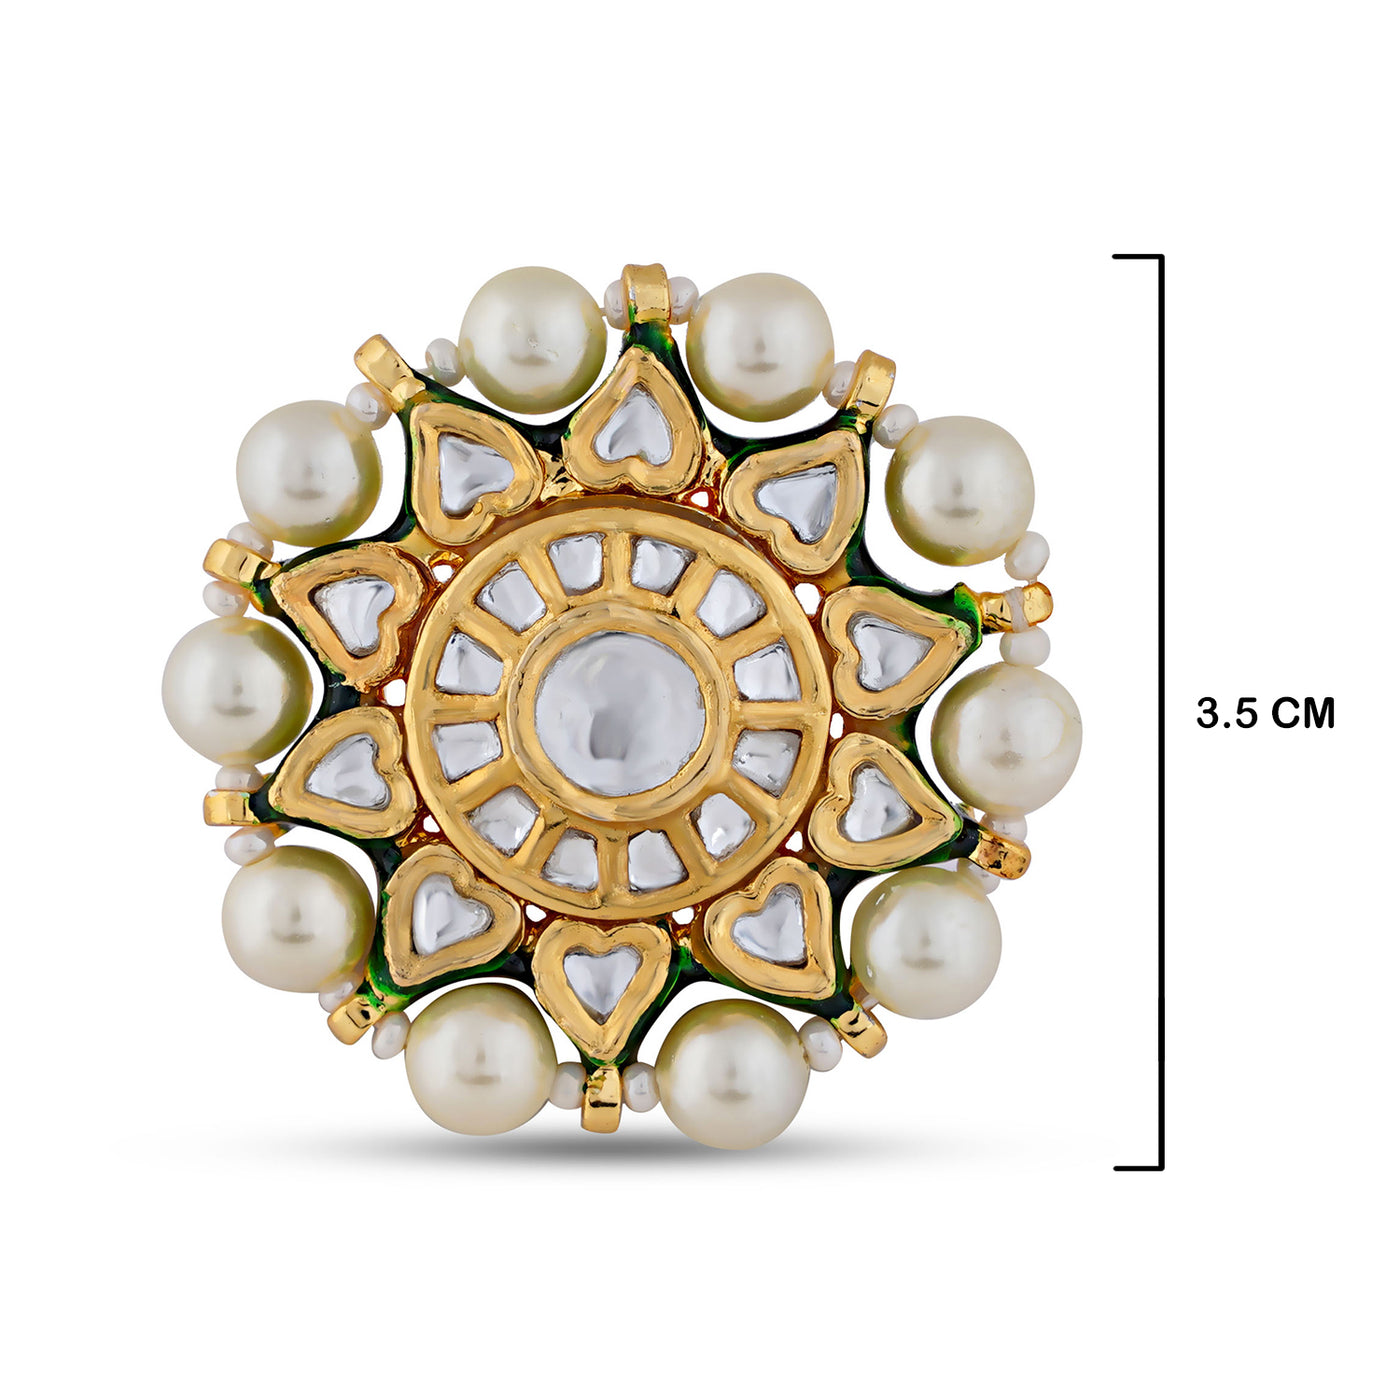 Sun Shaped Pearled Kundan Ring with measurements in cm. 3.5cm.